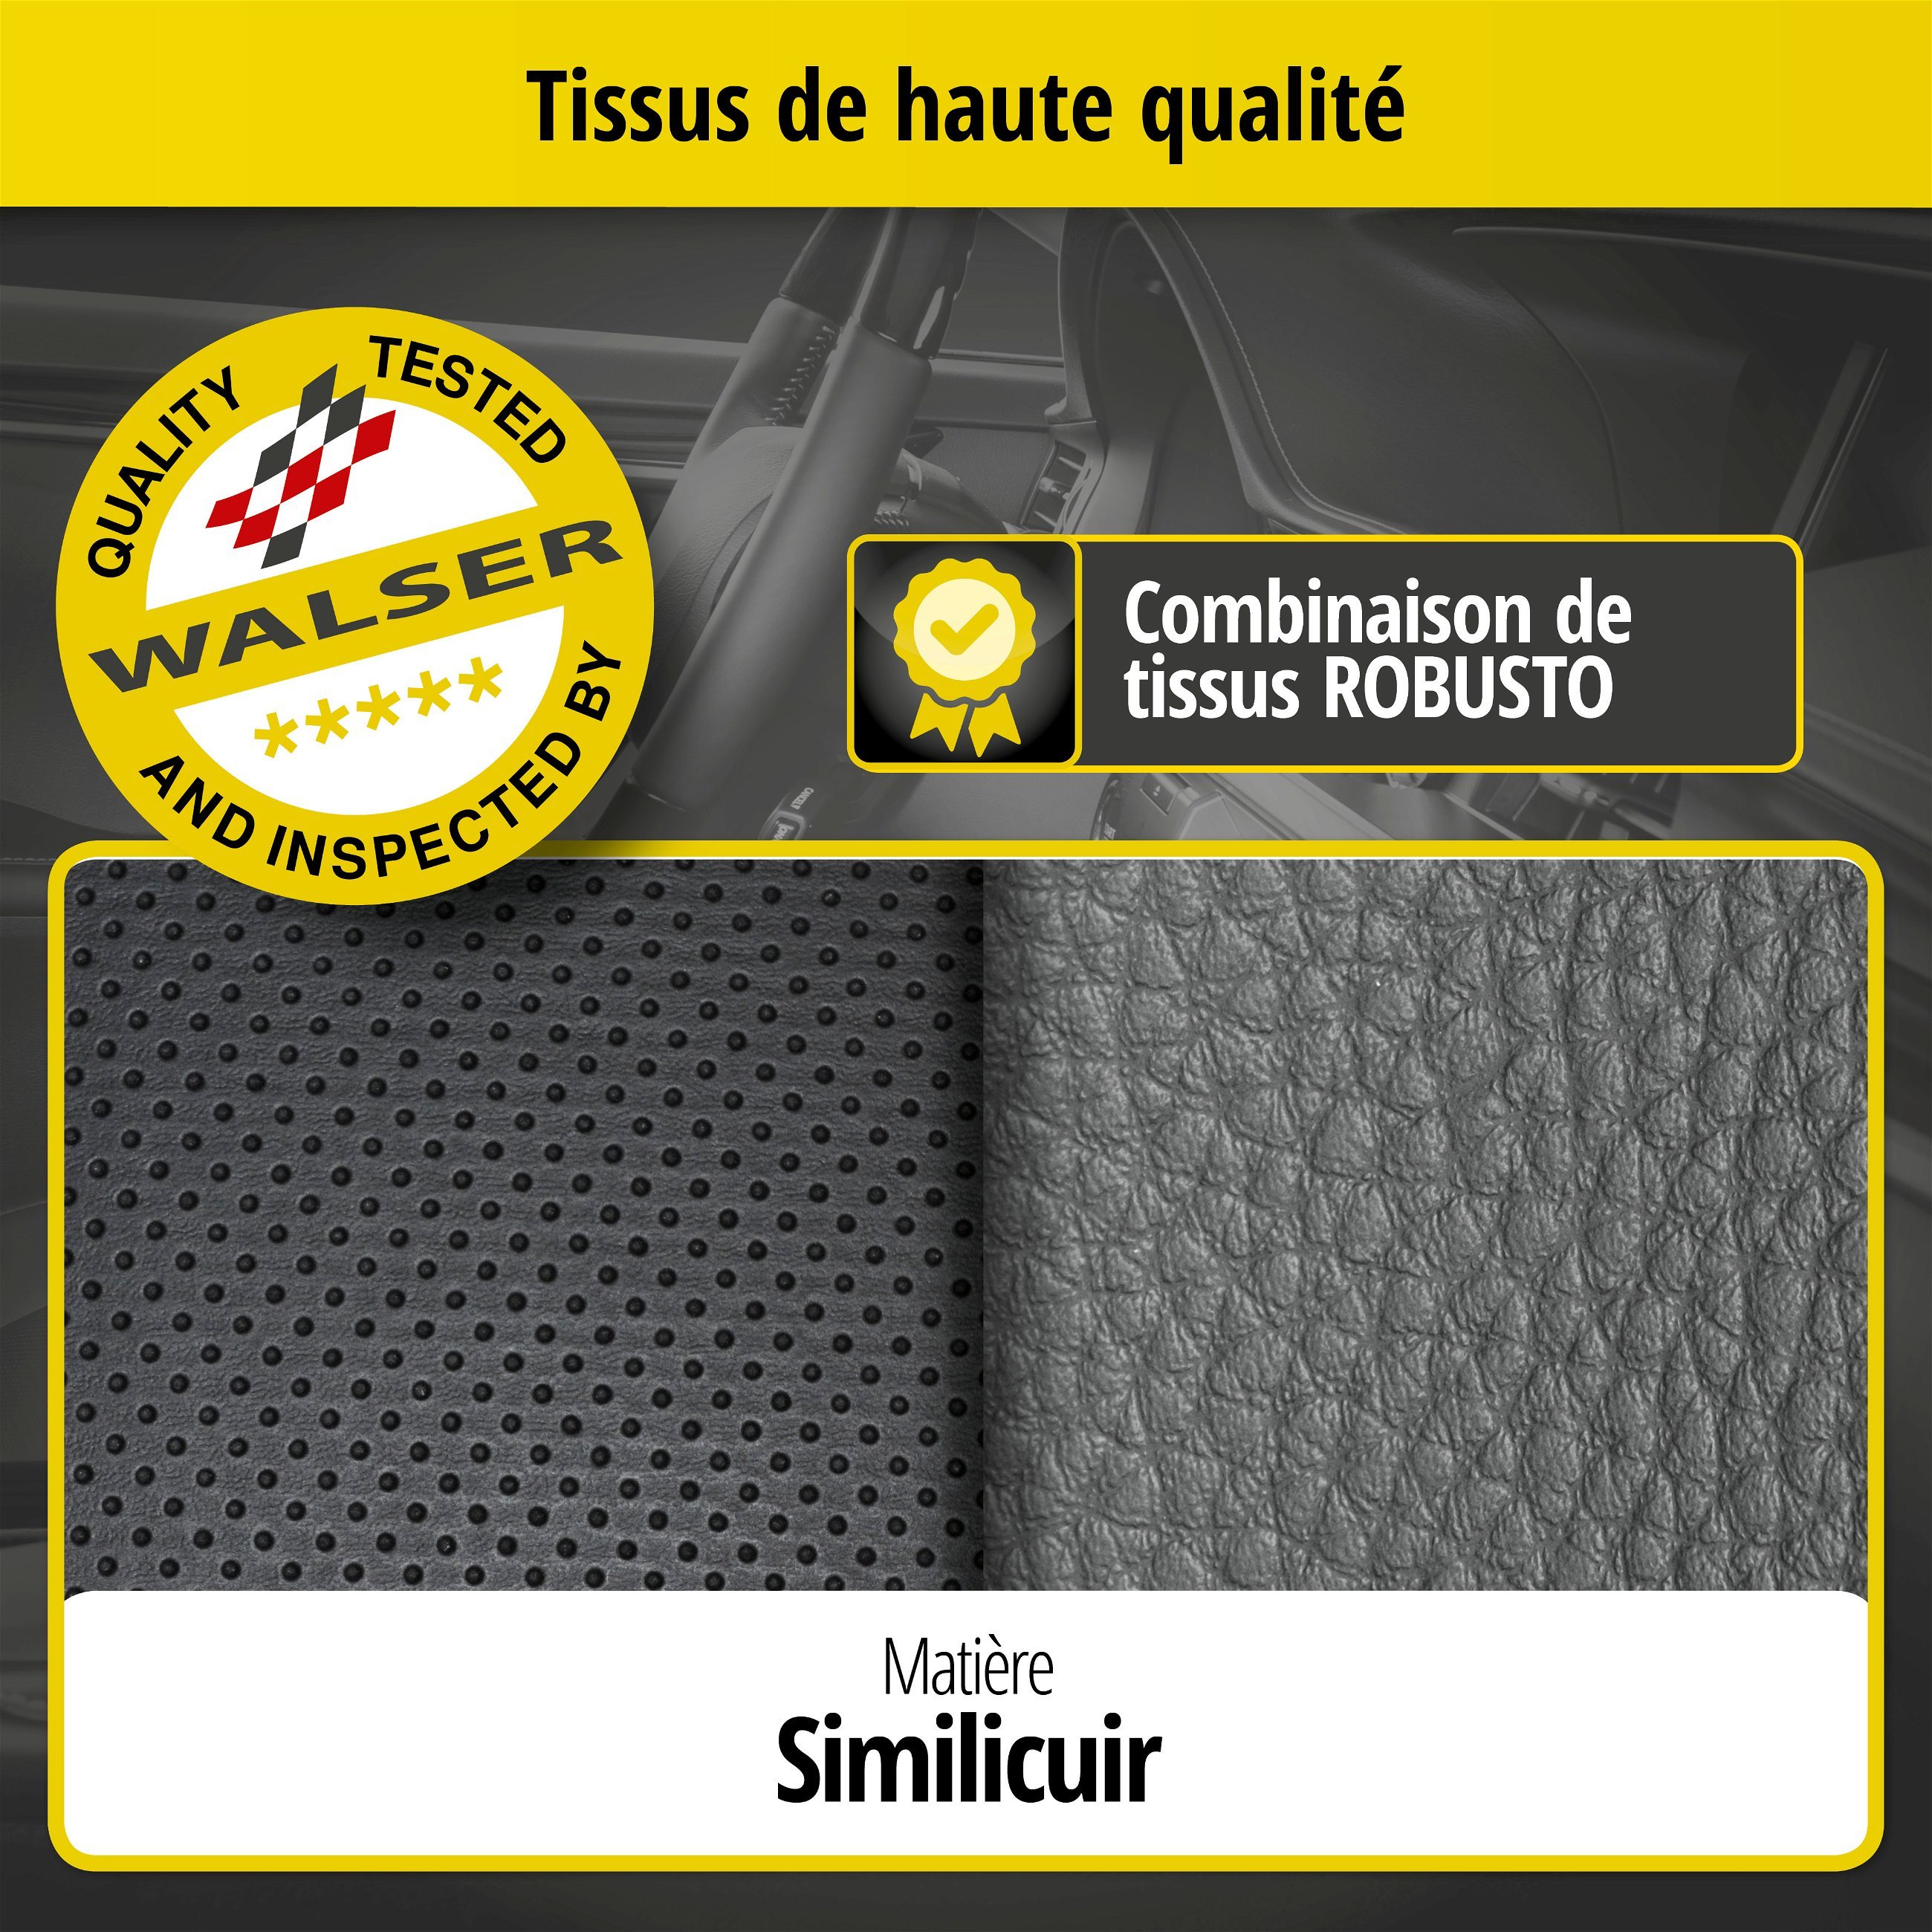 Housse de siège Robusto pour Opel Astra H 01/2004-05/2014, Astra H notchback 02/2007-05/2014, 1 housse de siège arrière pour sièges normaux